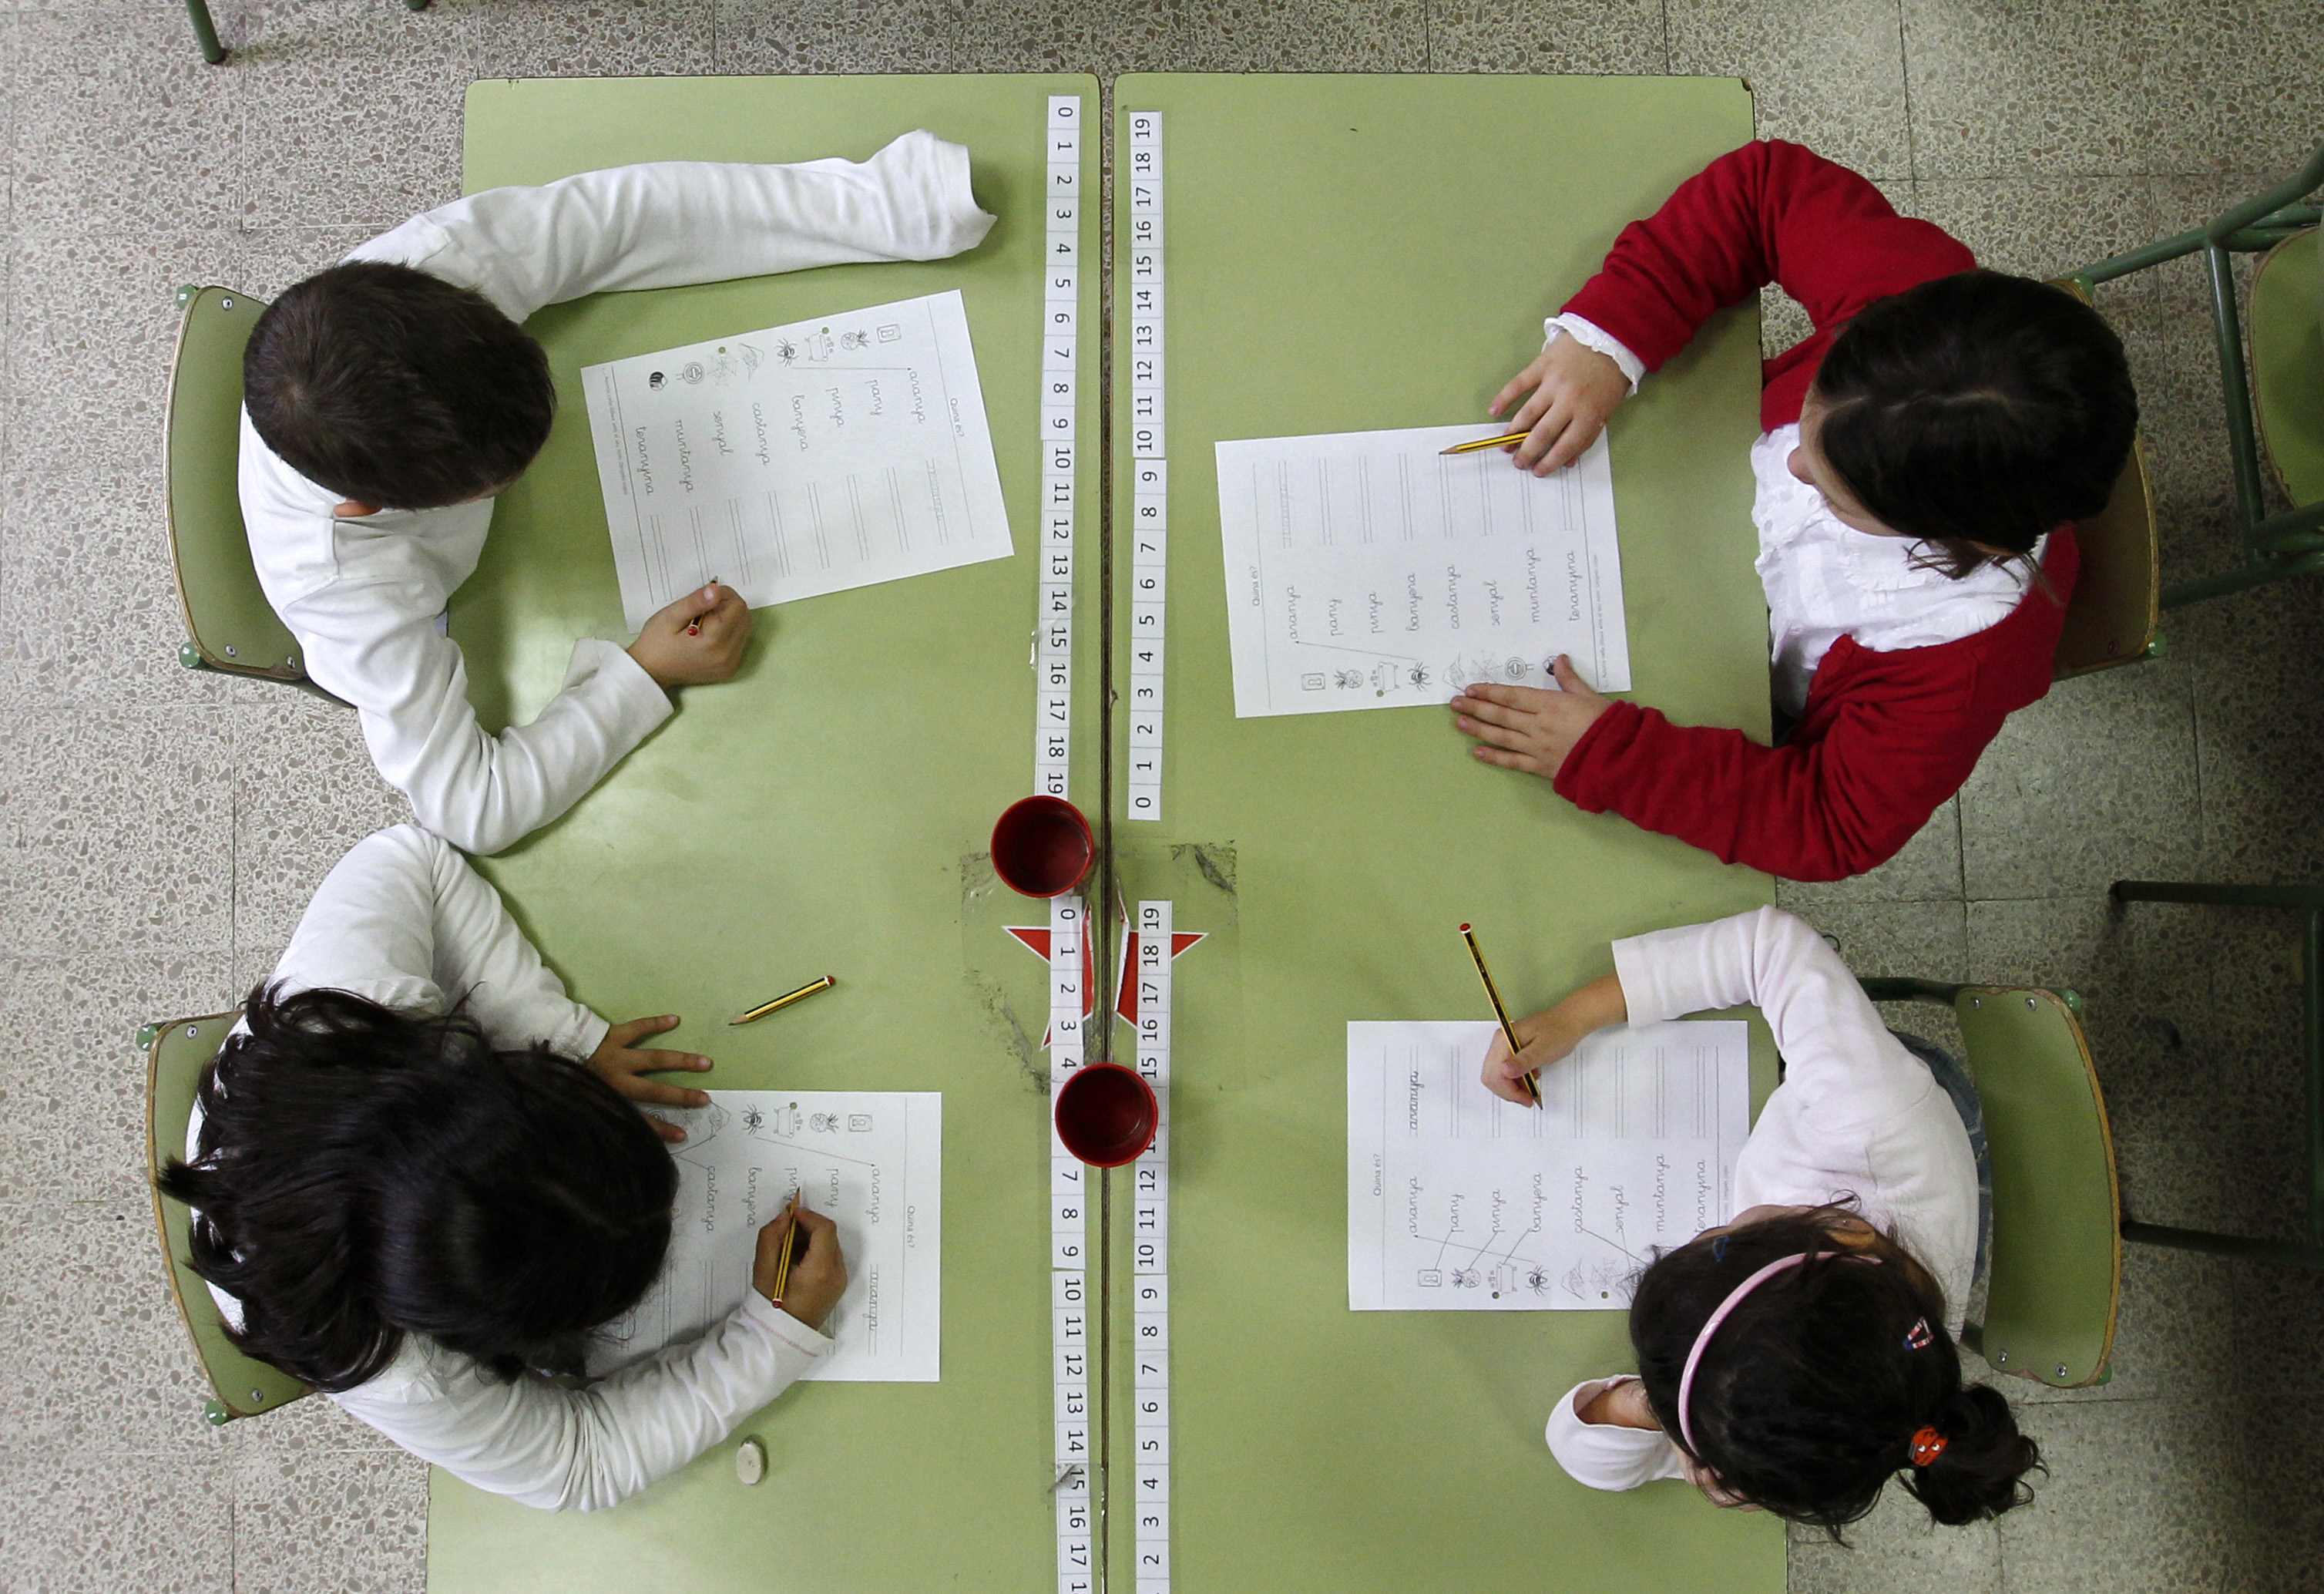 Pupils do some handwriting exercises during a language class at a public school in El Masnou, near Barcelona, December 14, 2012. Spain's leader vowed on Friday to press on with an education reform that has fueled separatist sentiment in Catalonia, where politicians were closing on a pact that could lead to a vote on independence. REUTERS/Albert Gea (SPAIN - Tags: POLITICS EDUCATION) - RTR3BKPE